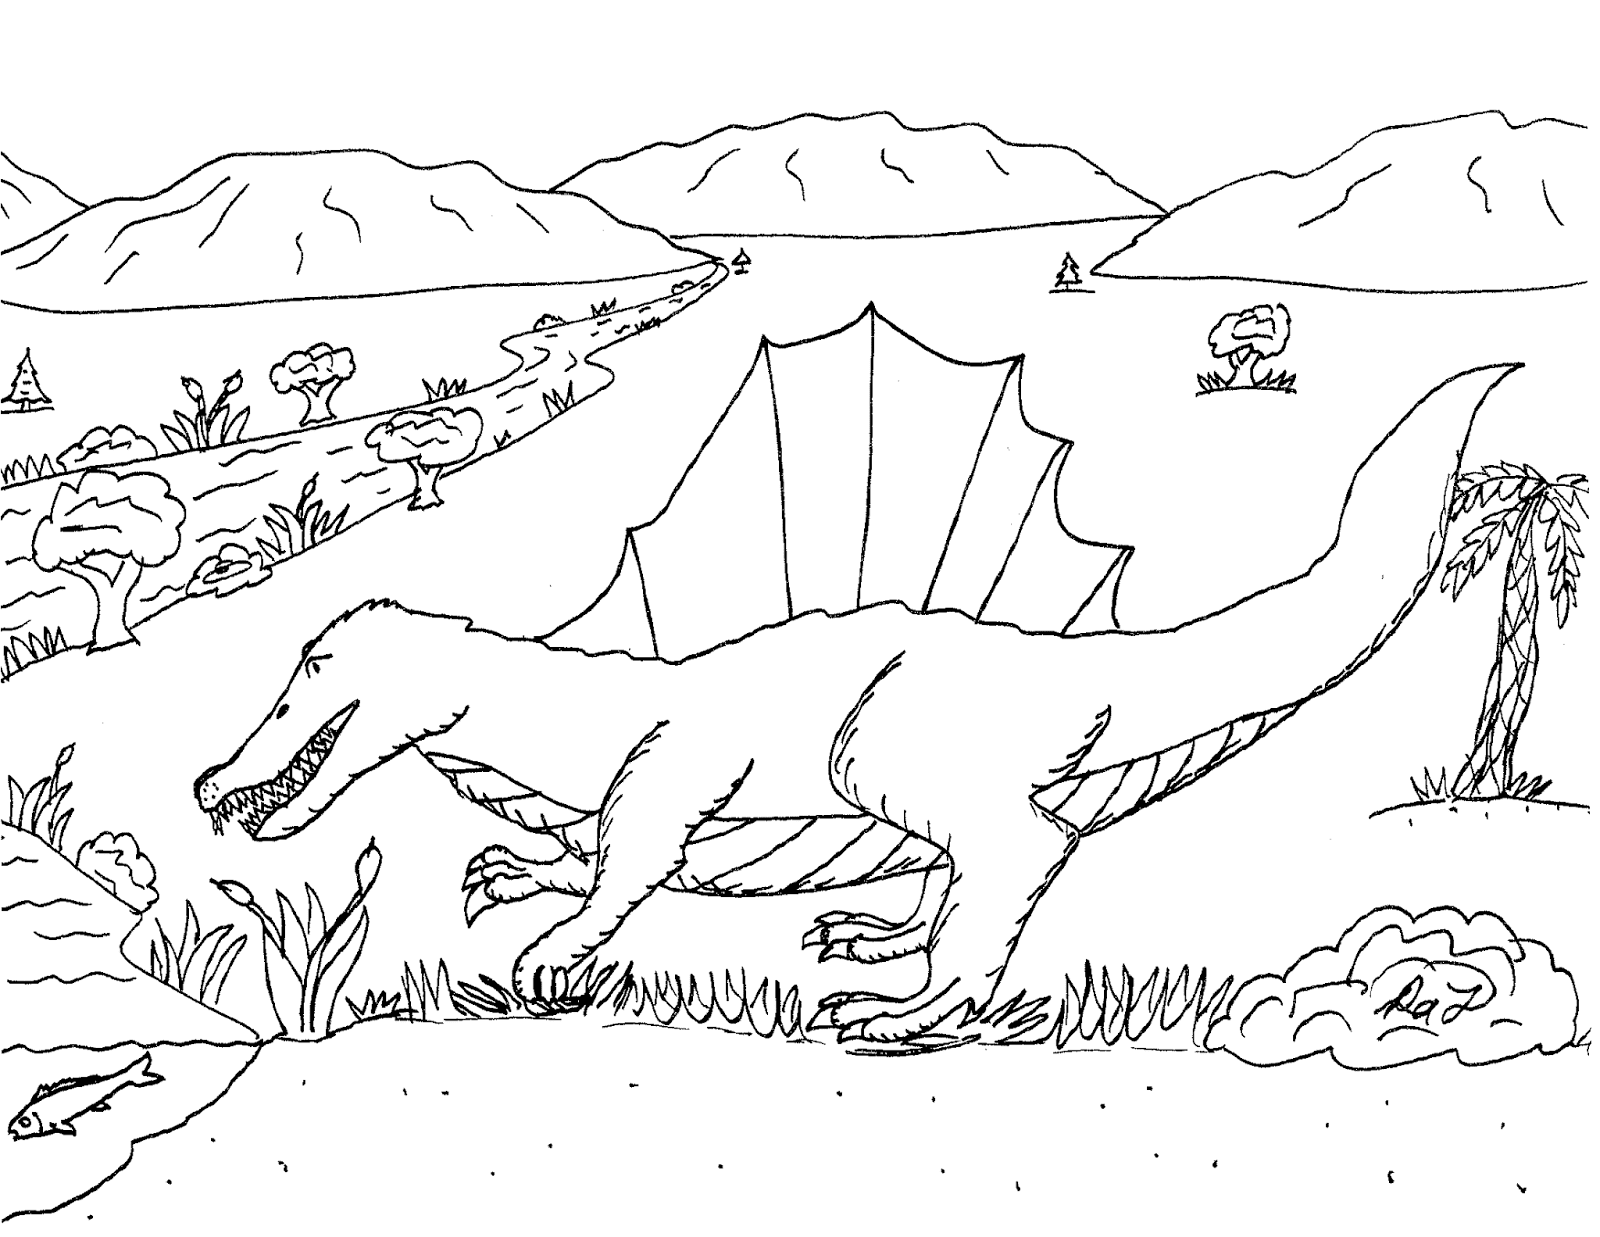 Download Robin's Great Coloring Pages: Ouranosaurus, Spinosaurs, and Dimetrodon the Sailed Reptiles